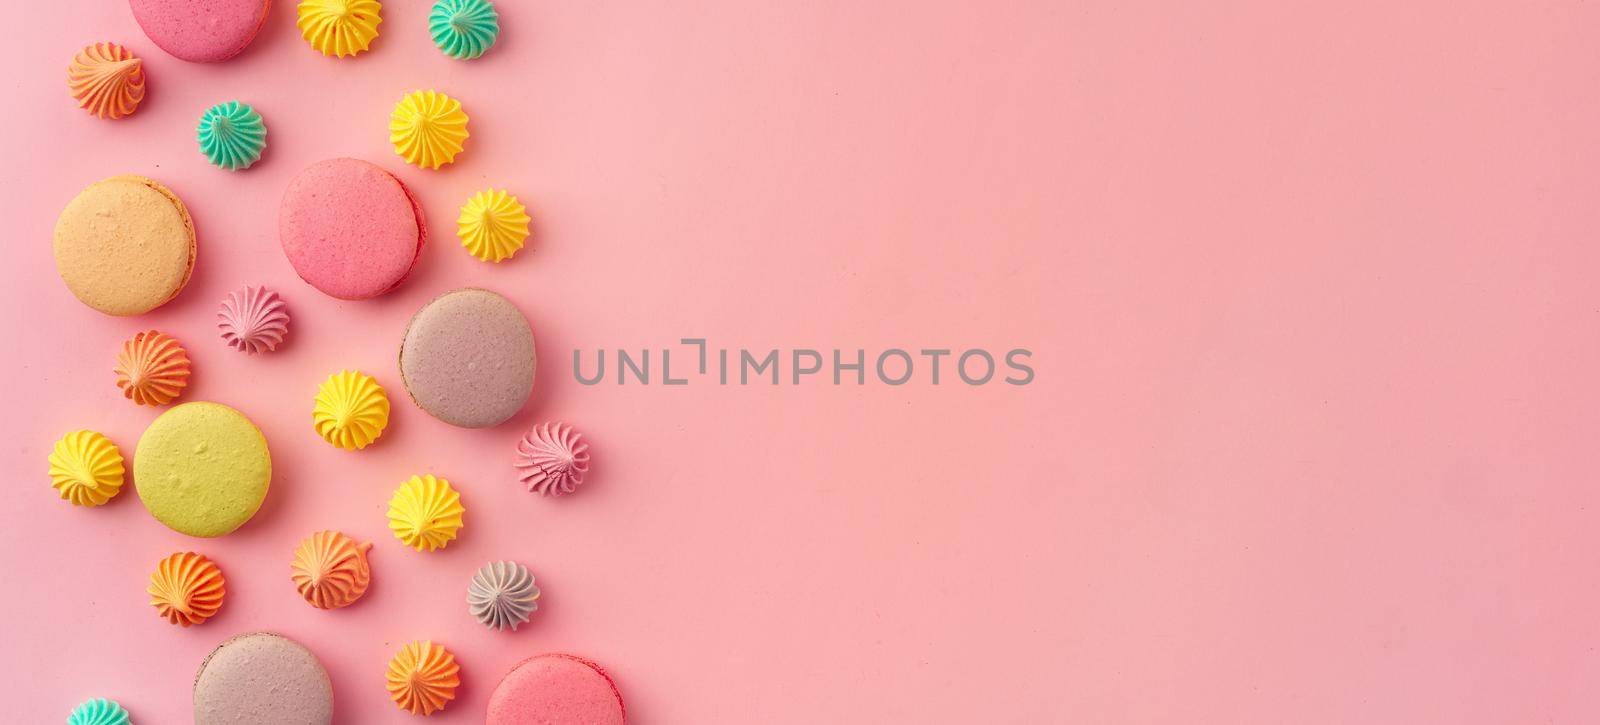 Pile of colorful macaroon cookies on pink background close up